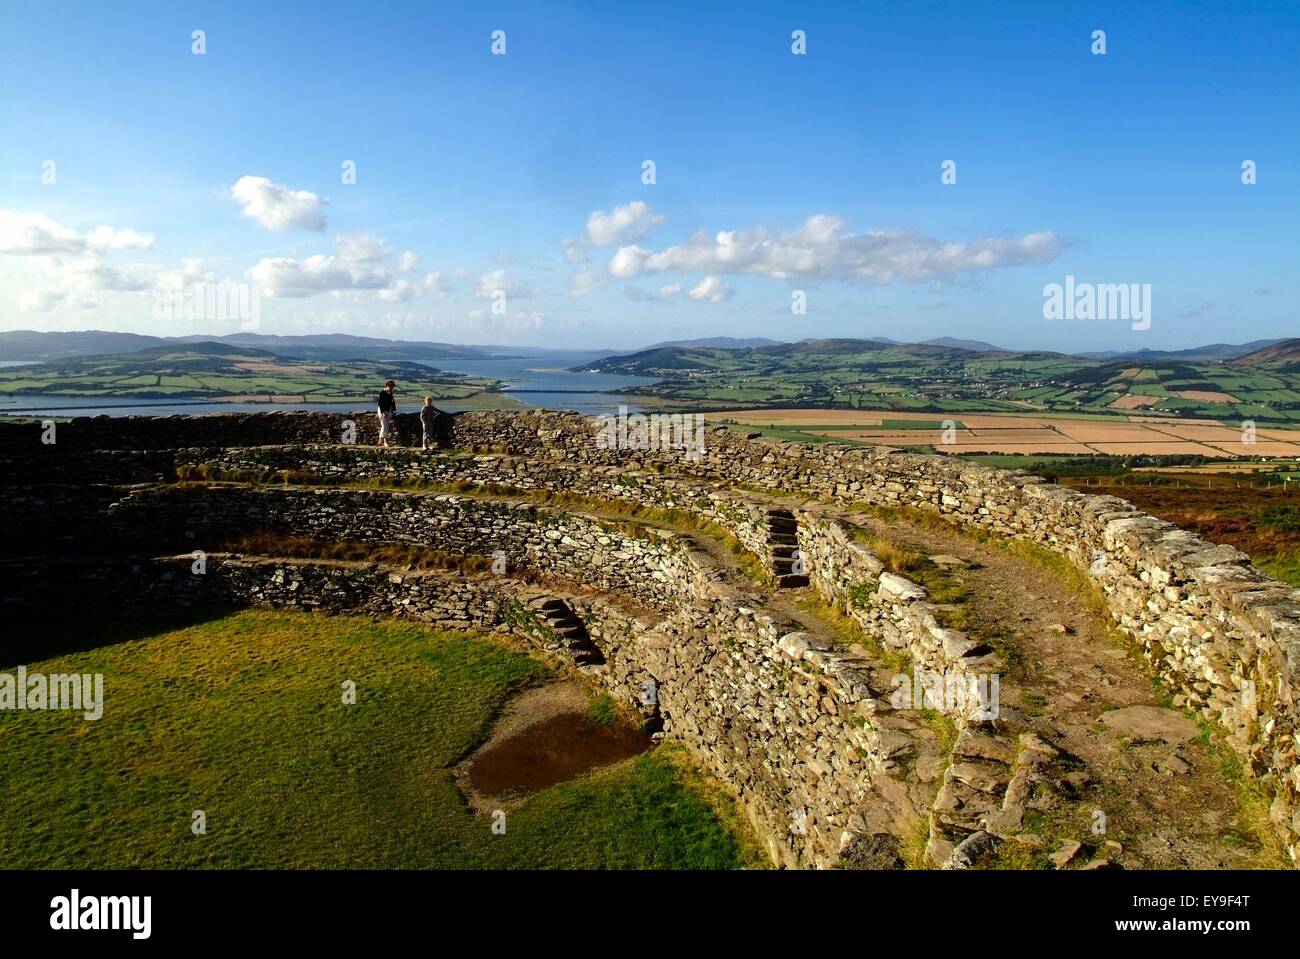 High Angle View Of Fortified Wall Of A Fort On A Hill, Grianan Ailigh, County Donegal, Republic Of Ireland Stock Photo